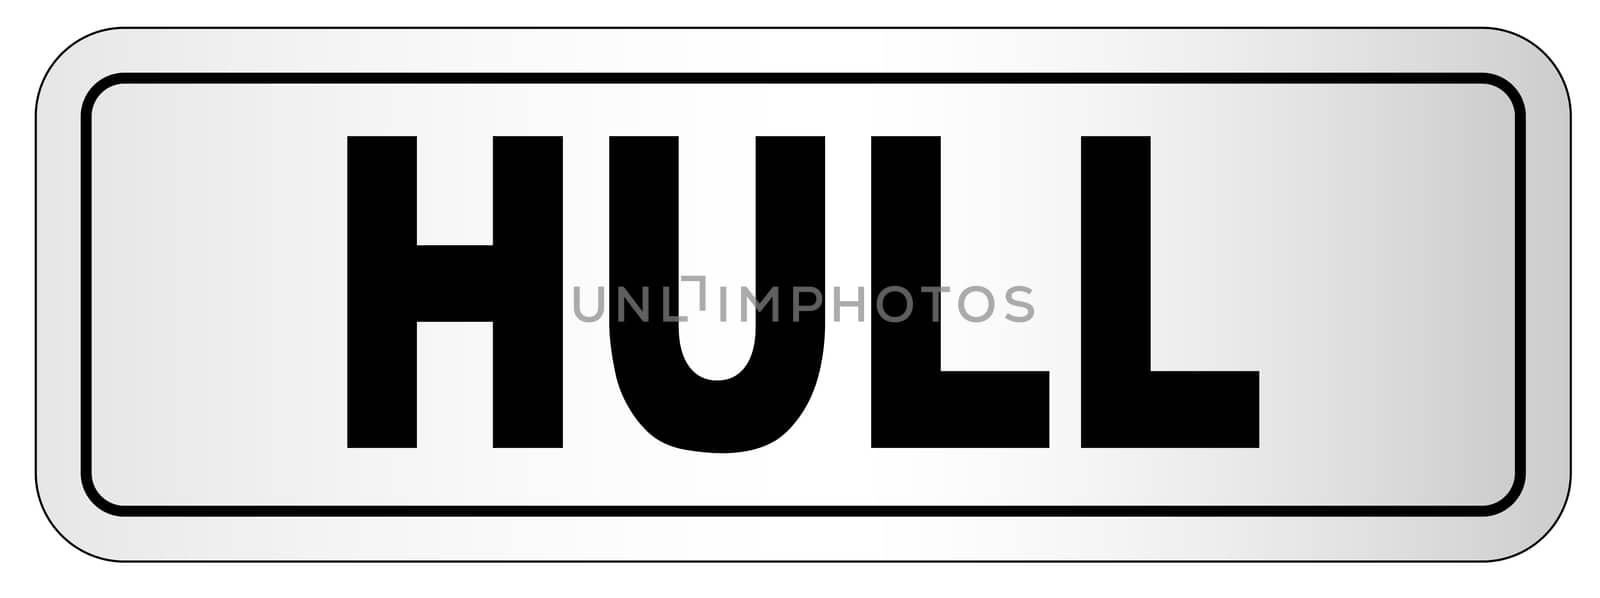 The city of Hull nameplate on a white background